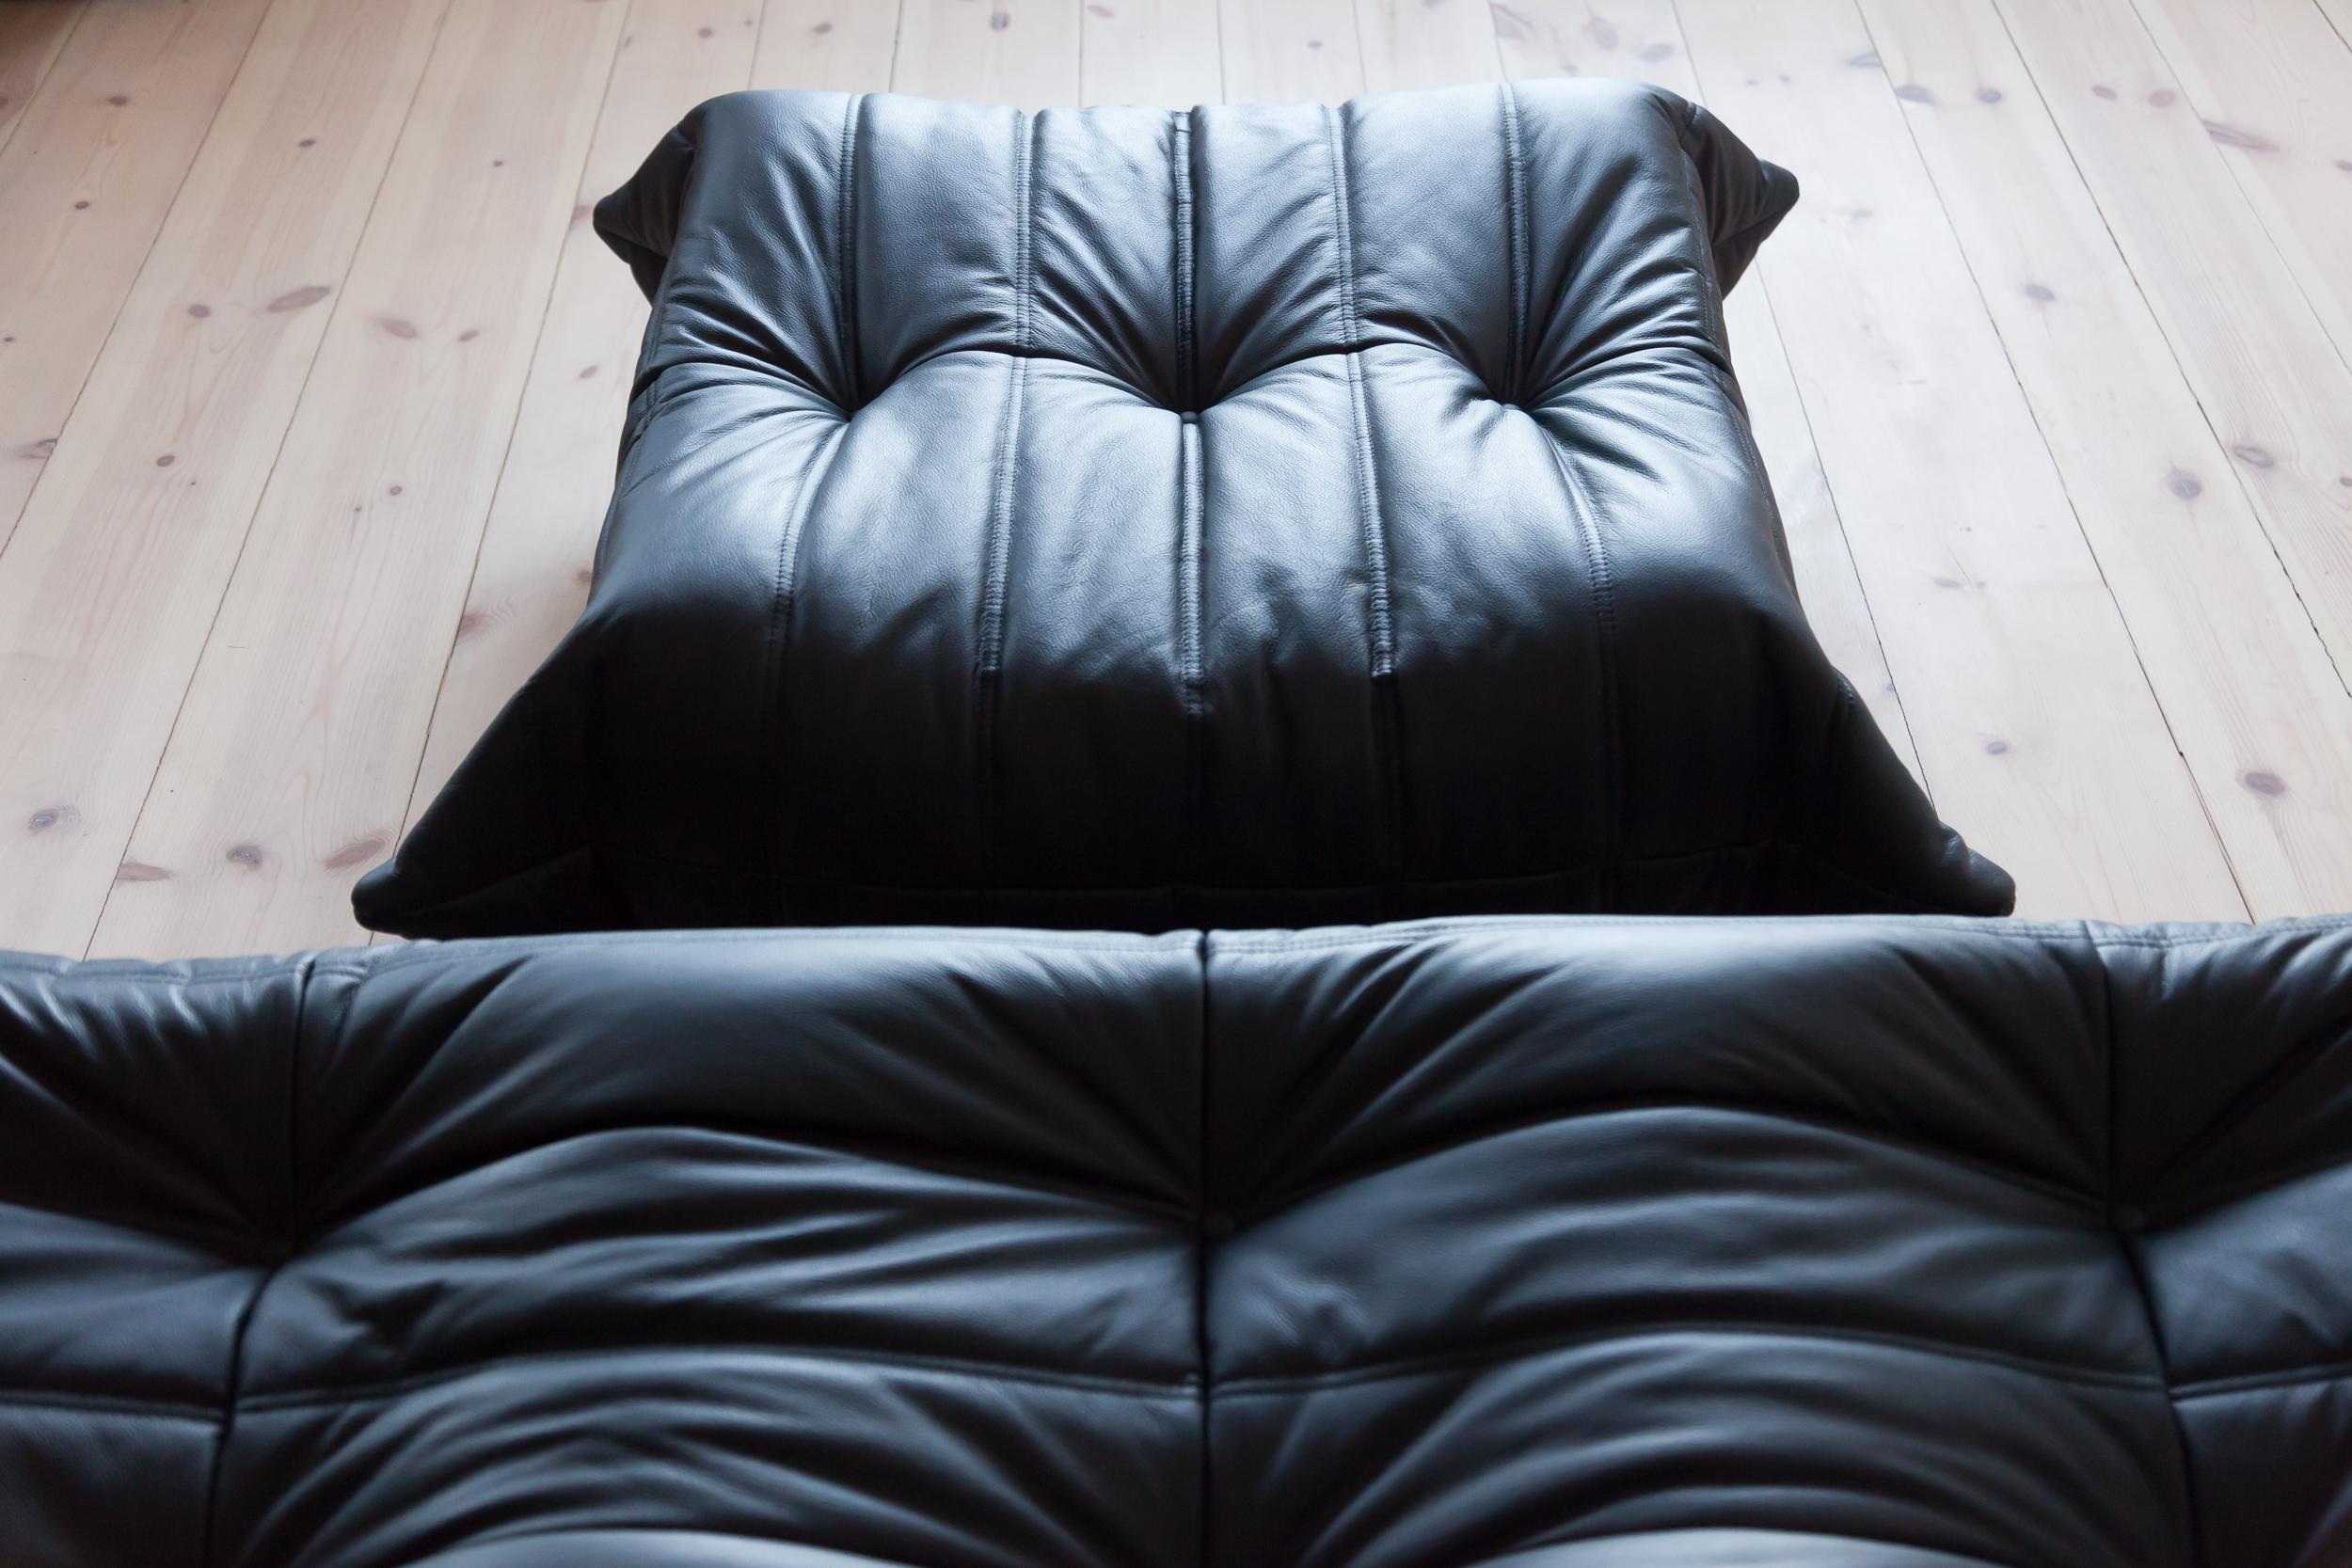 Three-piece togo set was designed by Michel Ducaroy in 1973 and was manufactured by Ligne Roset in France. It has been reupholstered in black high quality leather, and is made up of the following pieces, each with the original Ligne Roset logo and